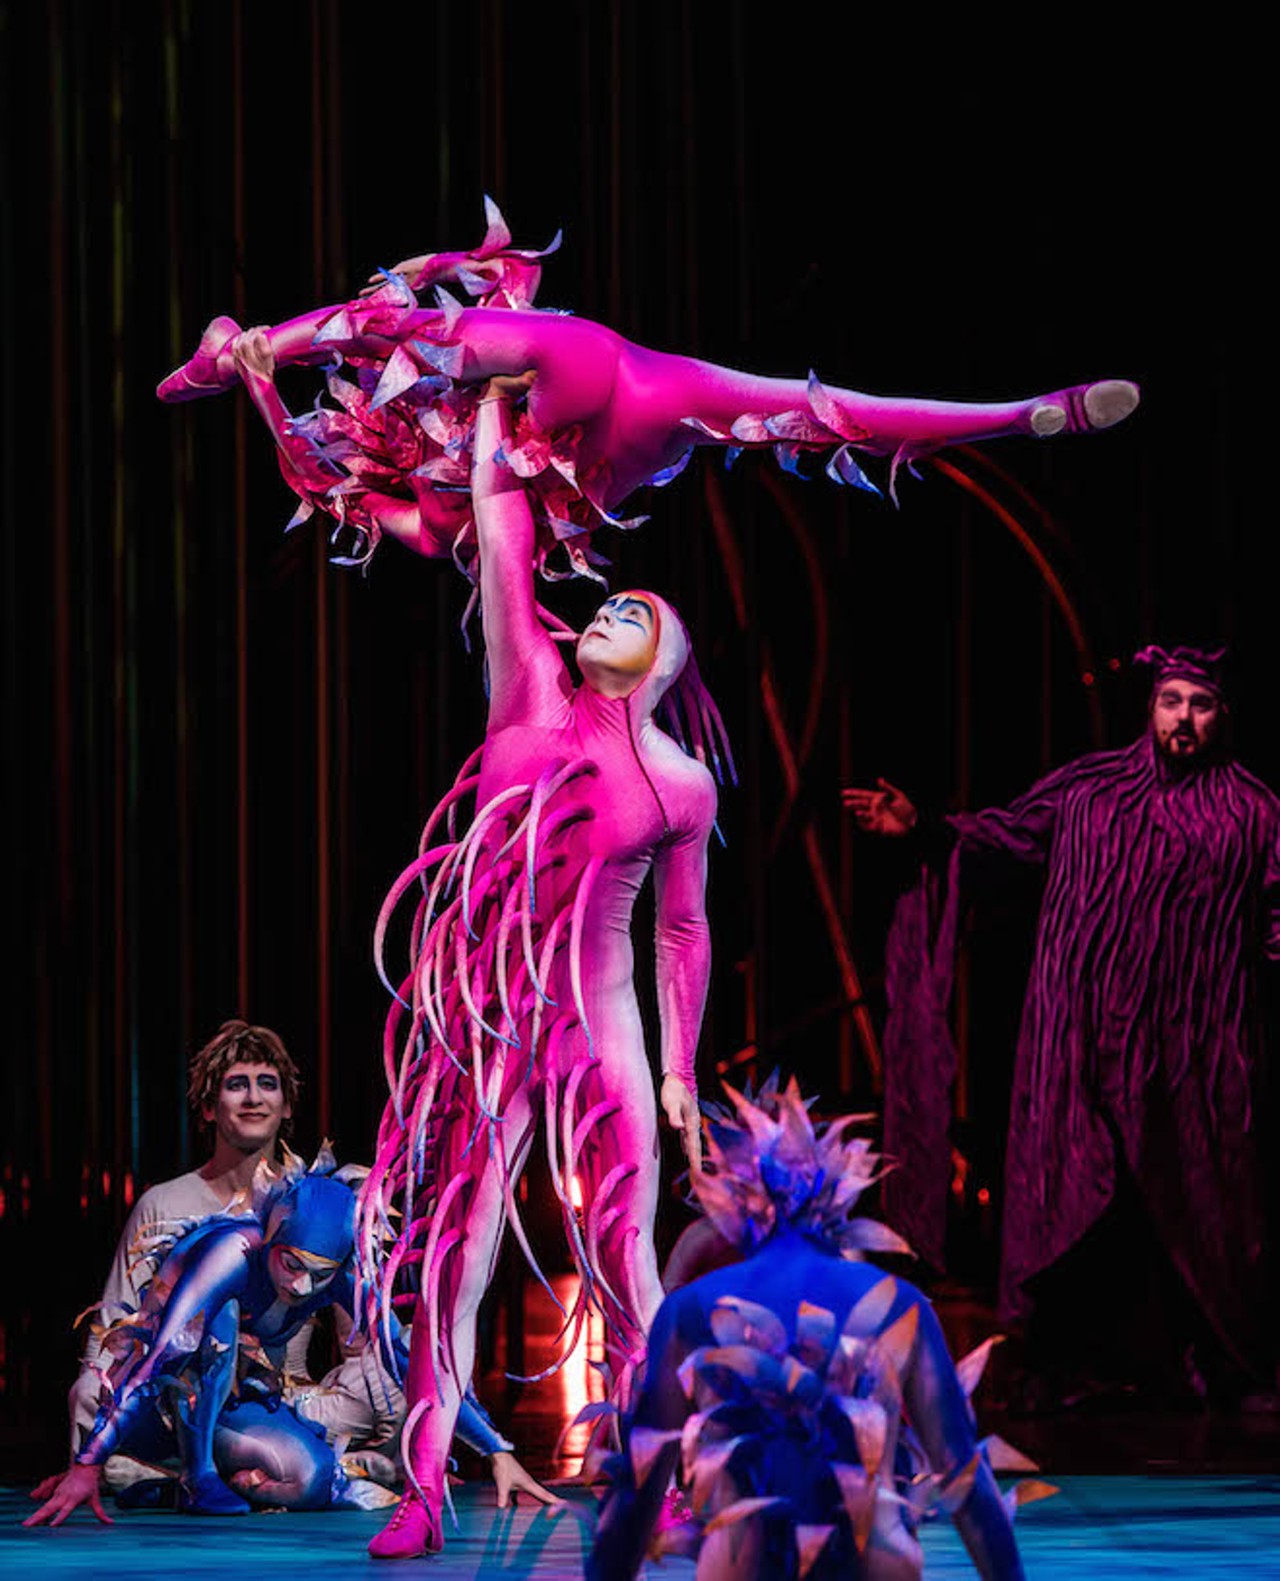 Wednesday, Sept. 17 - Sunday, Sept. 21Cirque du Soleil&#146;s VarekaiSet in a forest at the top of a volcano, Varekai is Cirque's newest arena show.